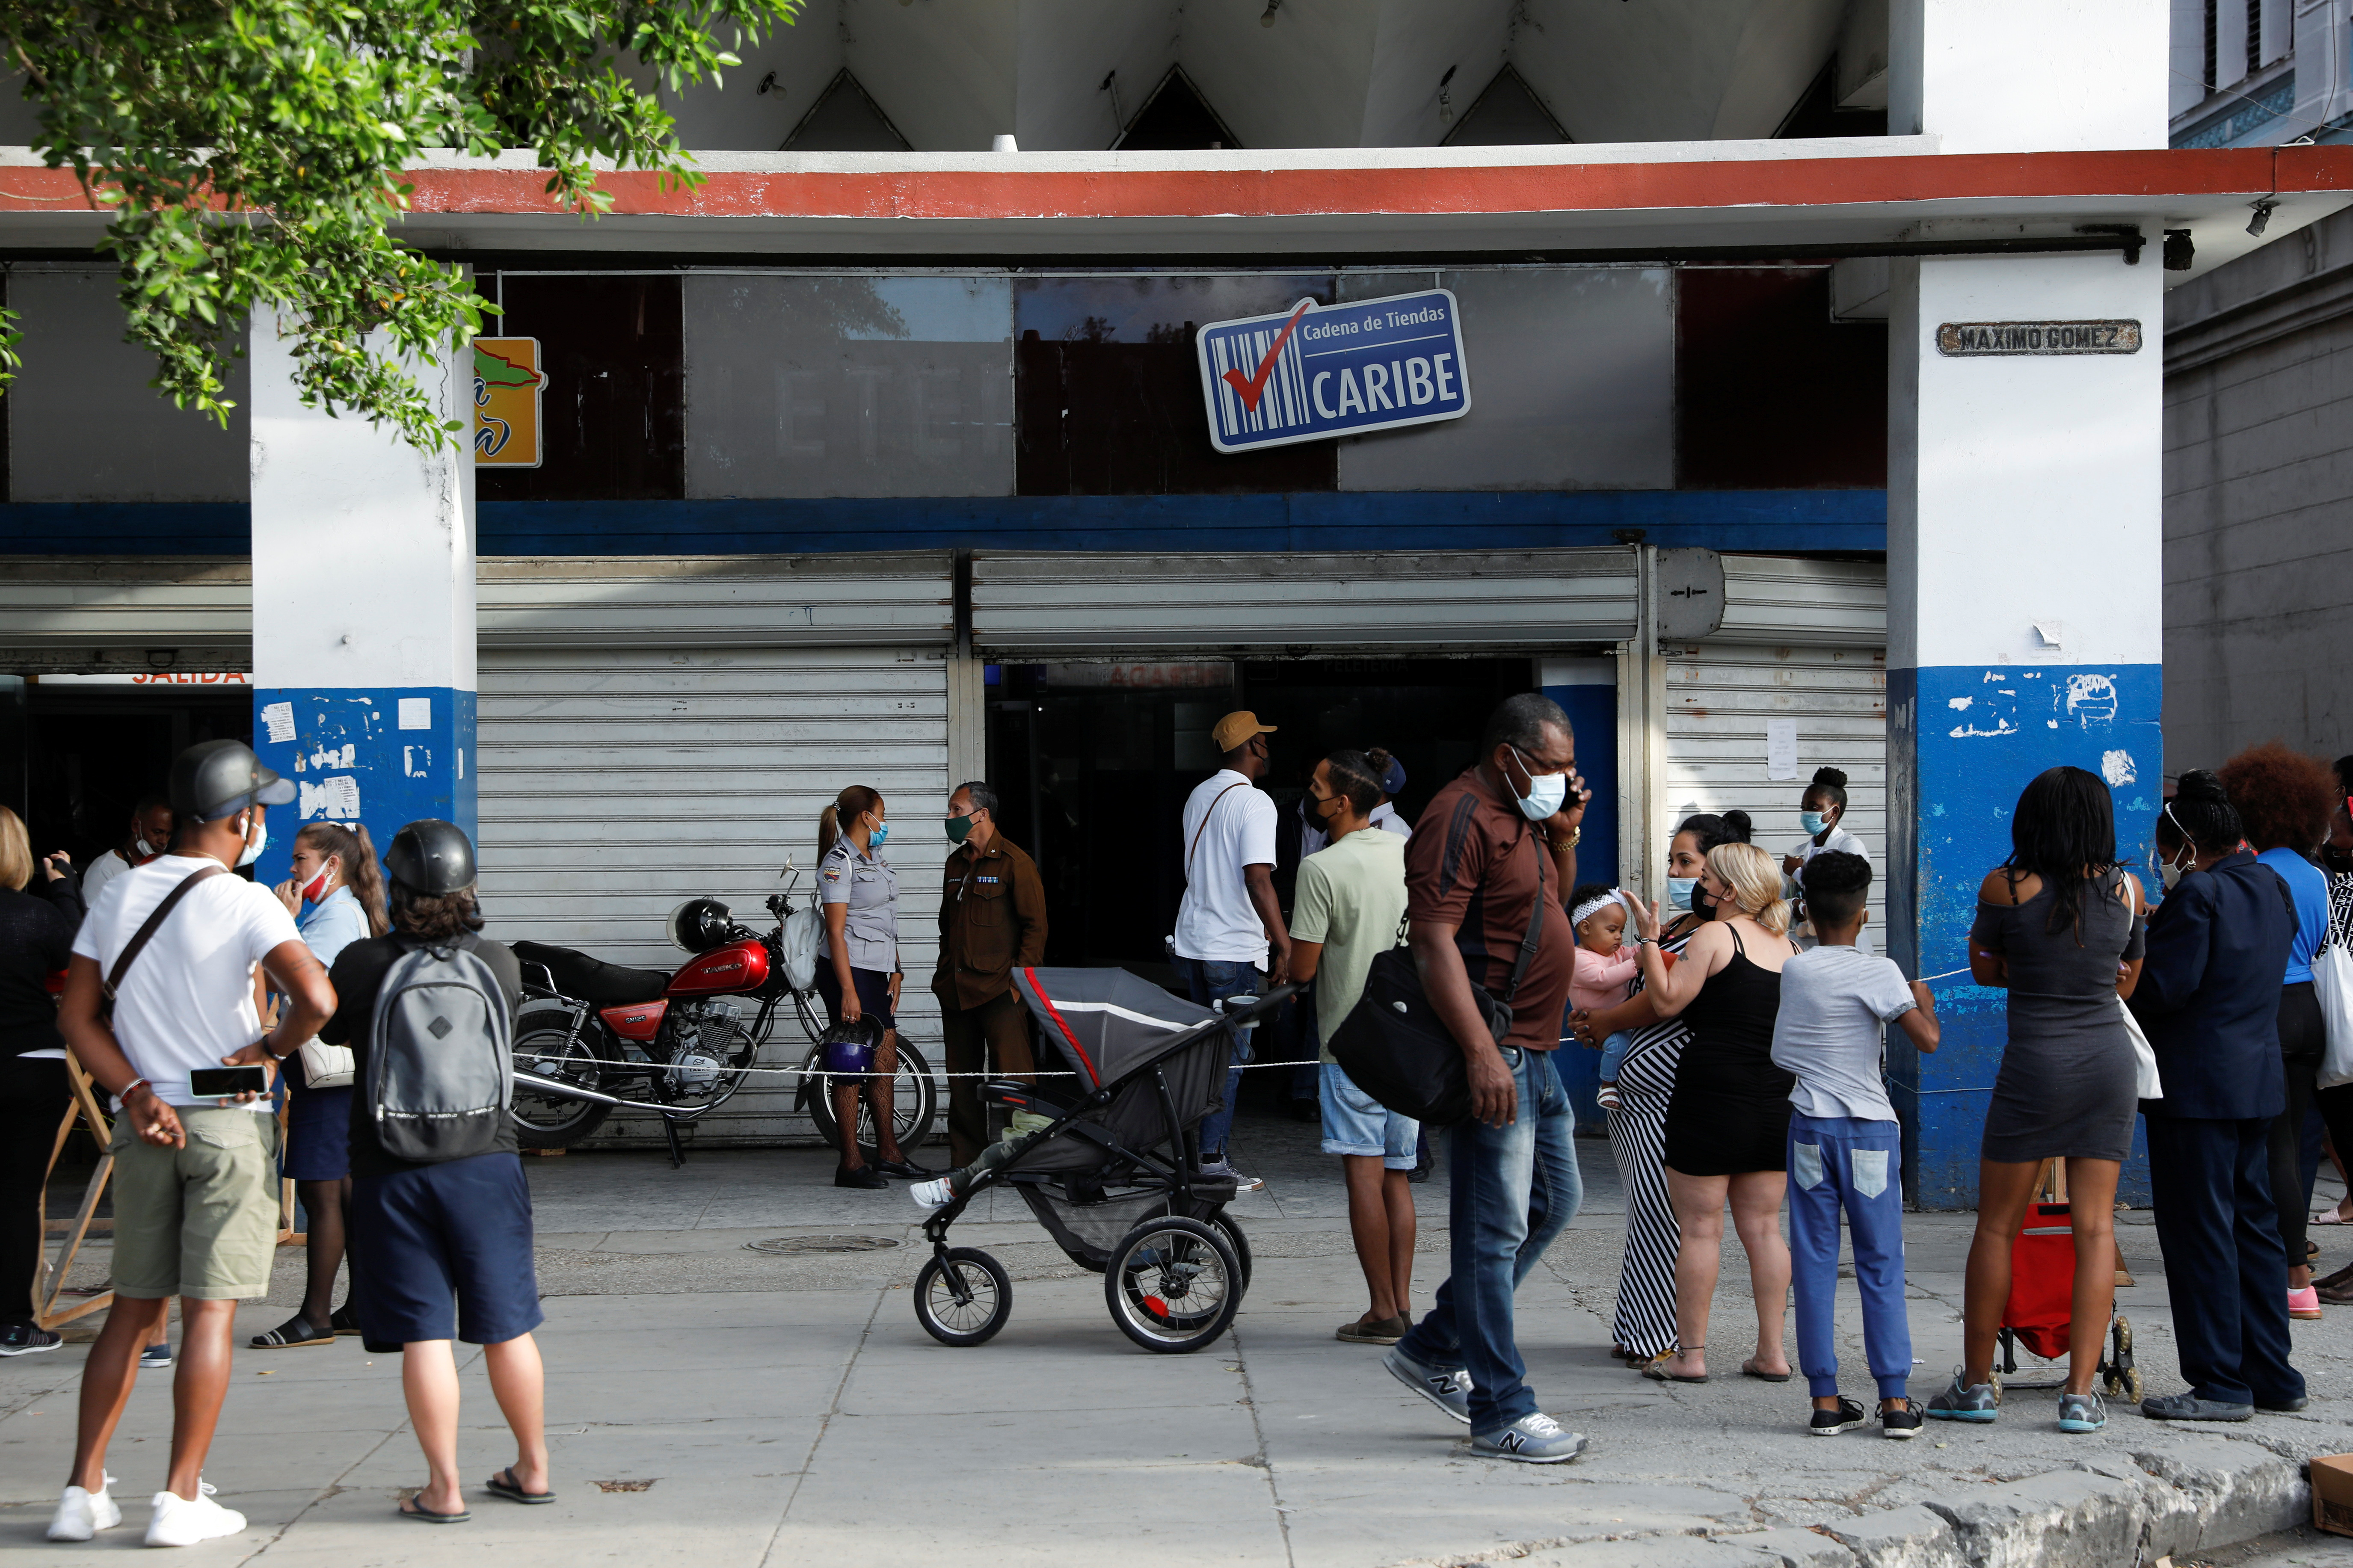 People line up to enter a store in downtown Havana